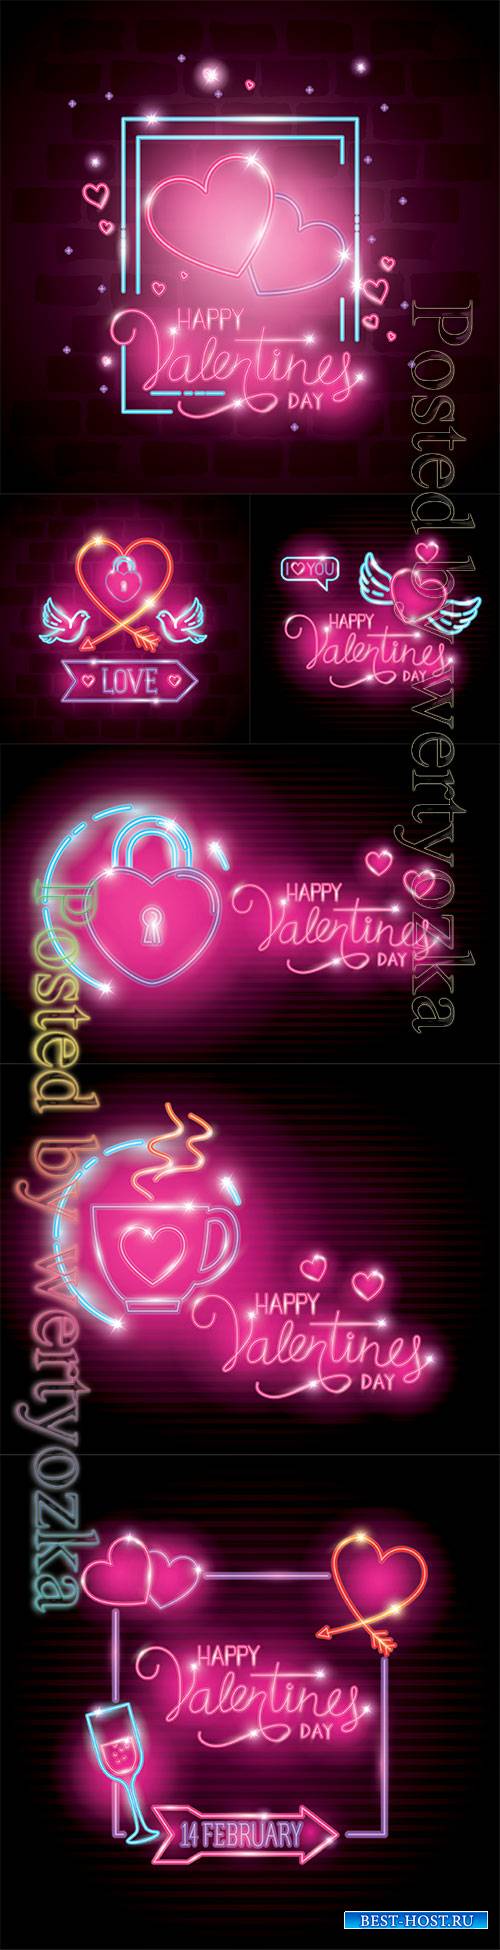 Happy valentines day with heart and wings of neon lights vector illustration design